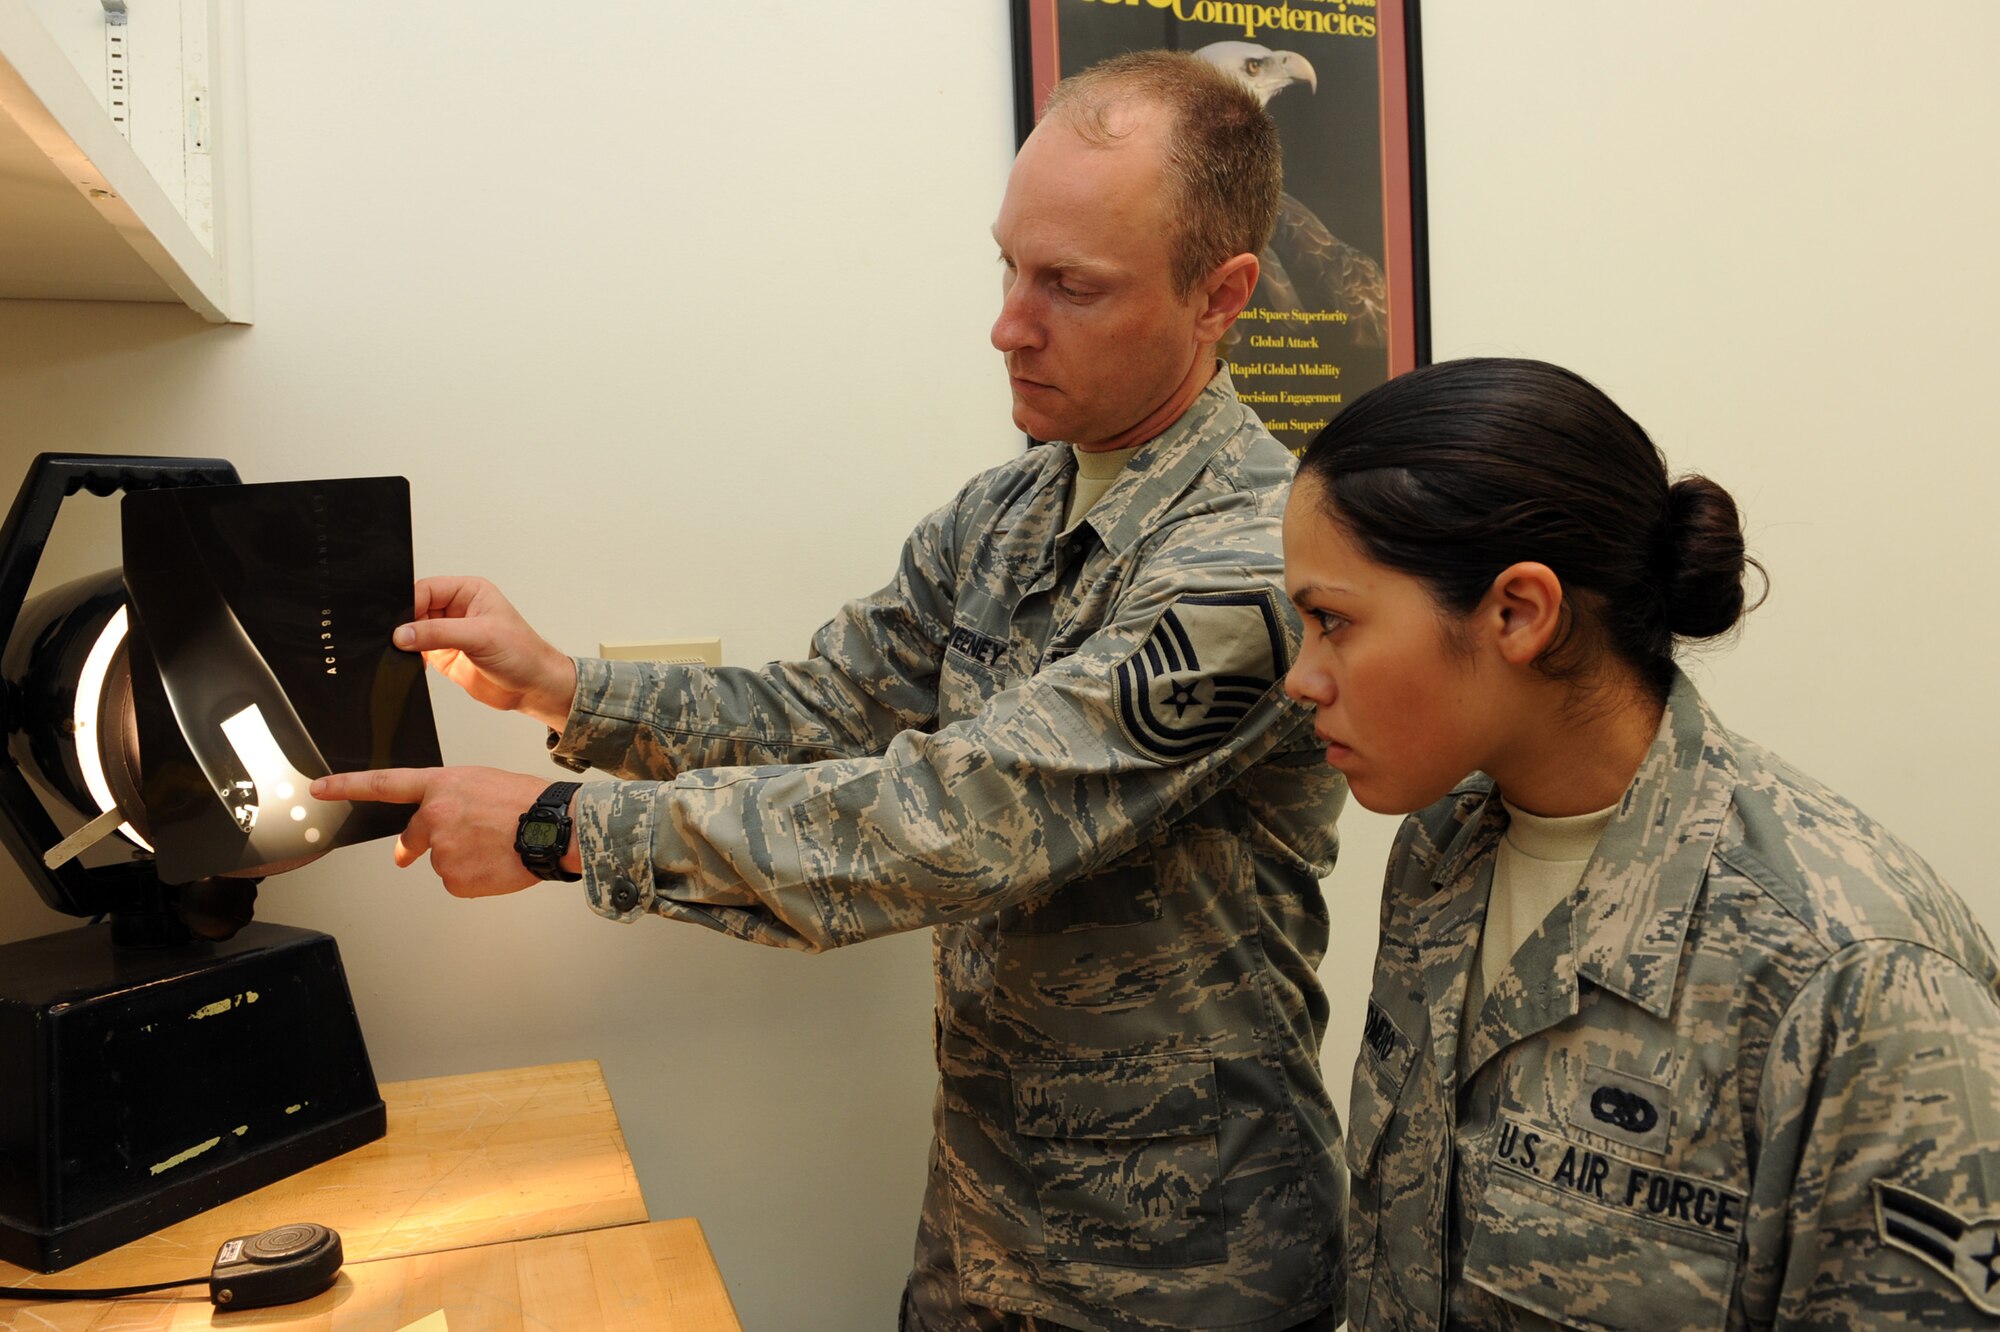 Master Sgt. Michael Sweeney, 19th Equipment Maintenance Squadron non-destructive inspection section chief, shows Airman 1st Class Veronica Romero, 19th Equipment Maintenance Squadron non-destructive inspection apprentice, June 8 how to identify foreign objects on X-rays of damaged equipment at the base non-destructive inspection lab. (U.S. Air Force photo by Senior Airman Ethan Morgan)